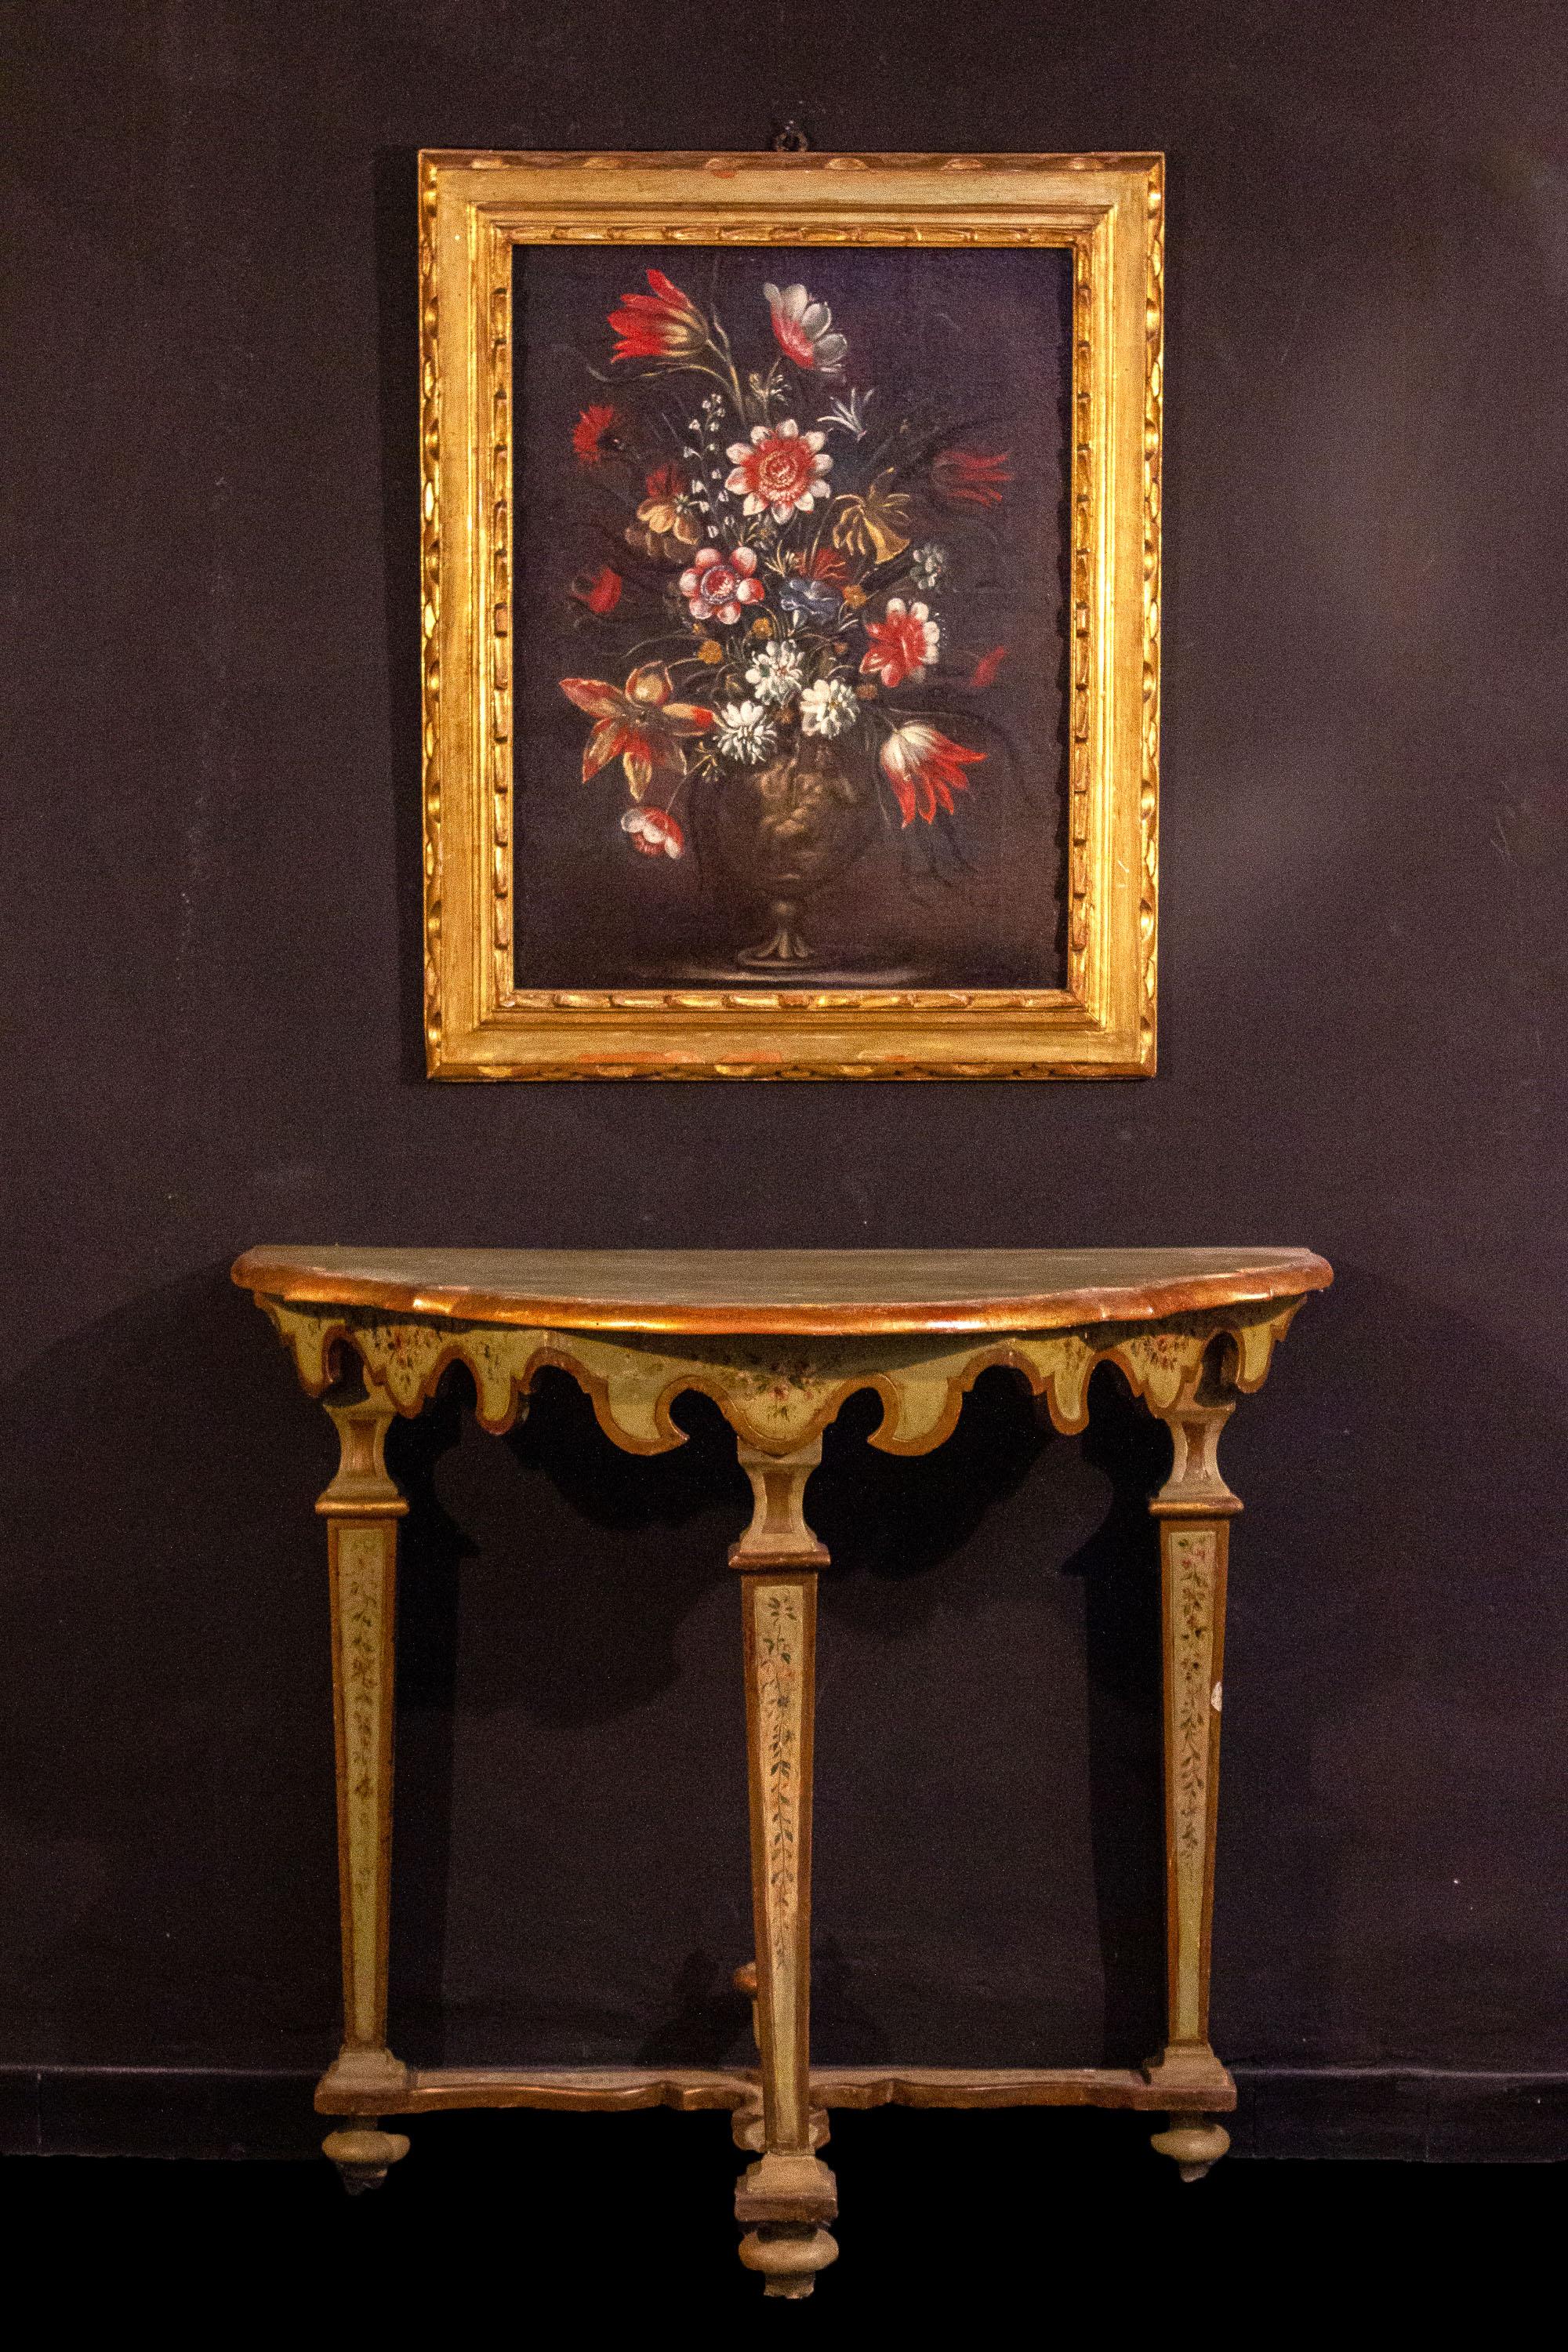 Pair of 18th century Italian Still Life Paintings of Flowers   For Sale 2